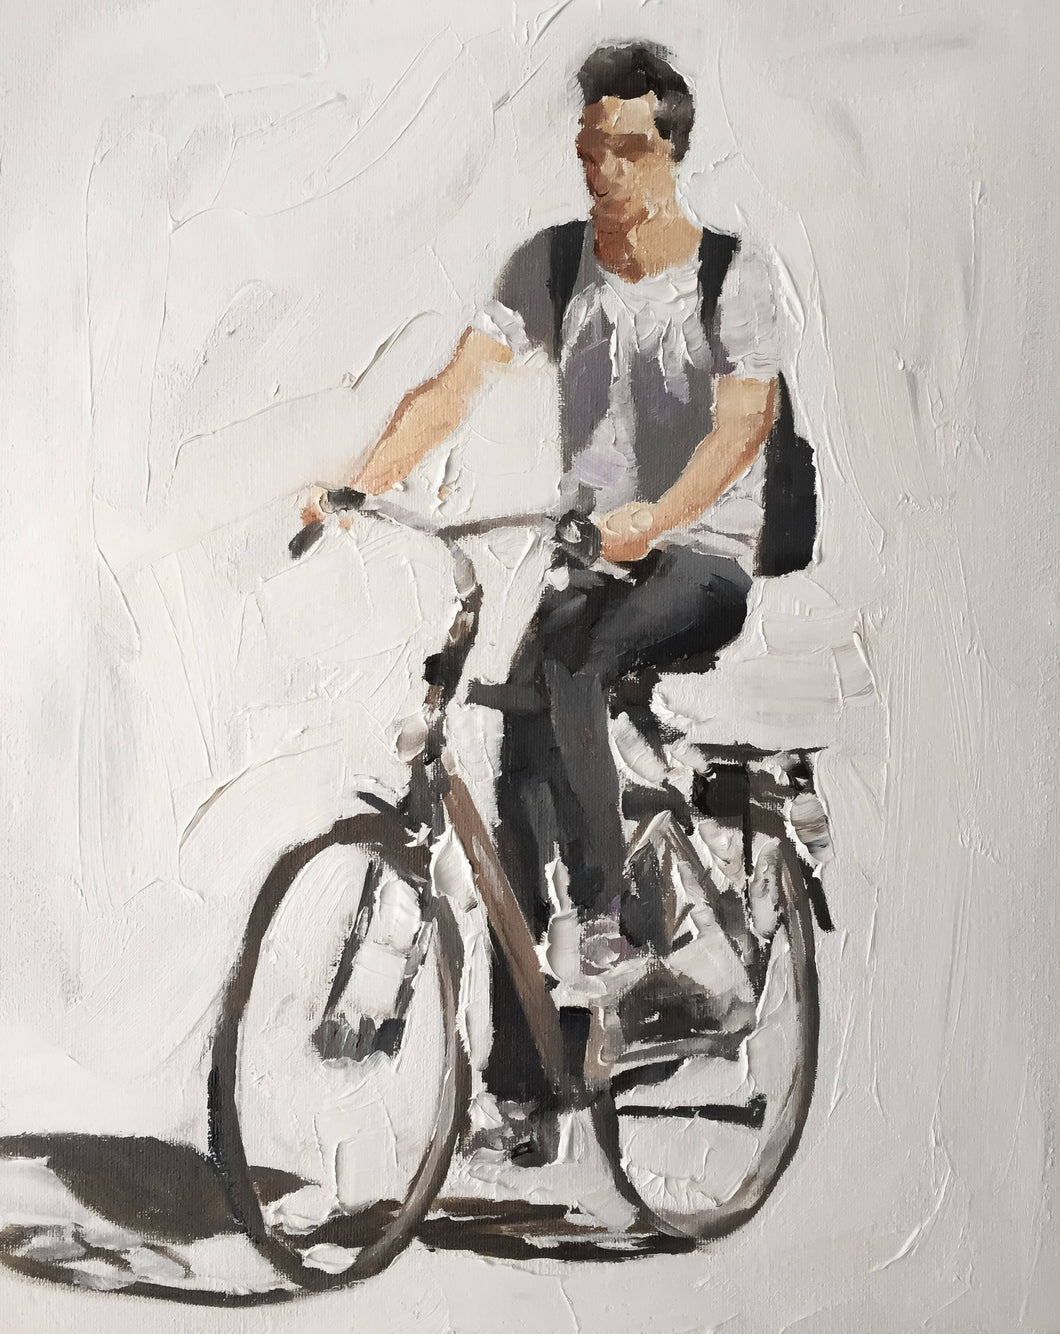 Man -Bicycle Painting - Cycling art - Cycling Poster - Cycling Print - Fine Art - from original oil painting by James Coates